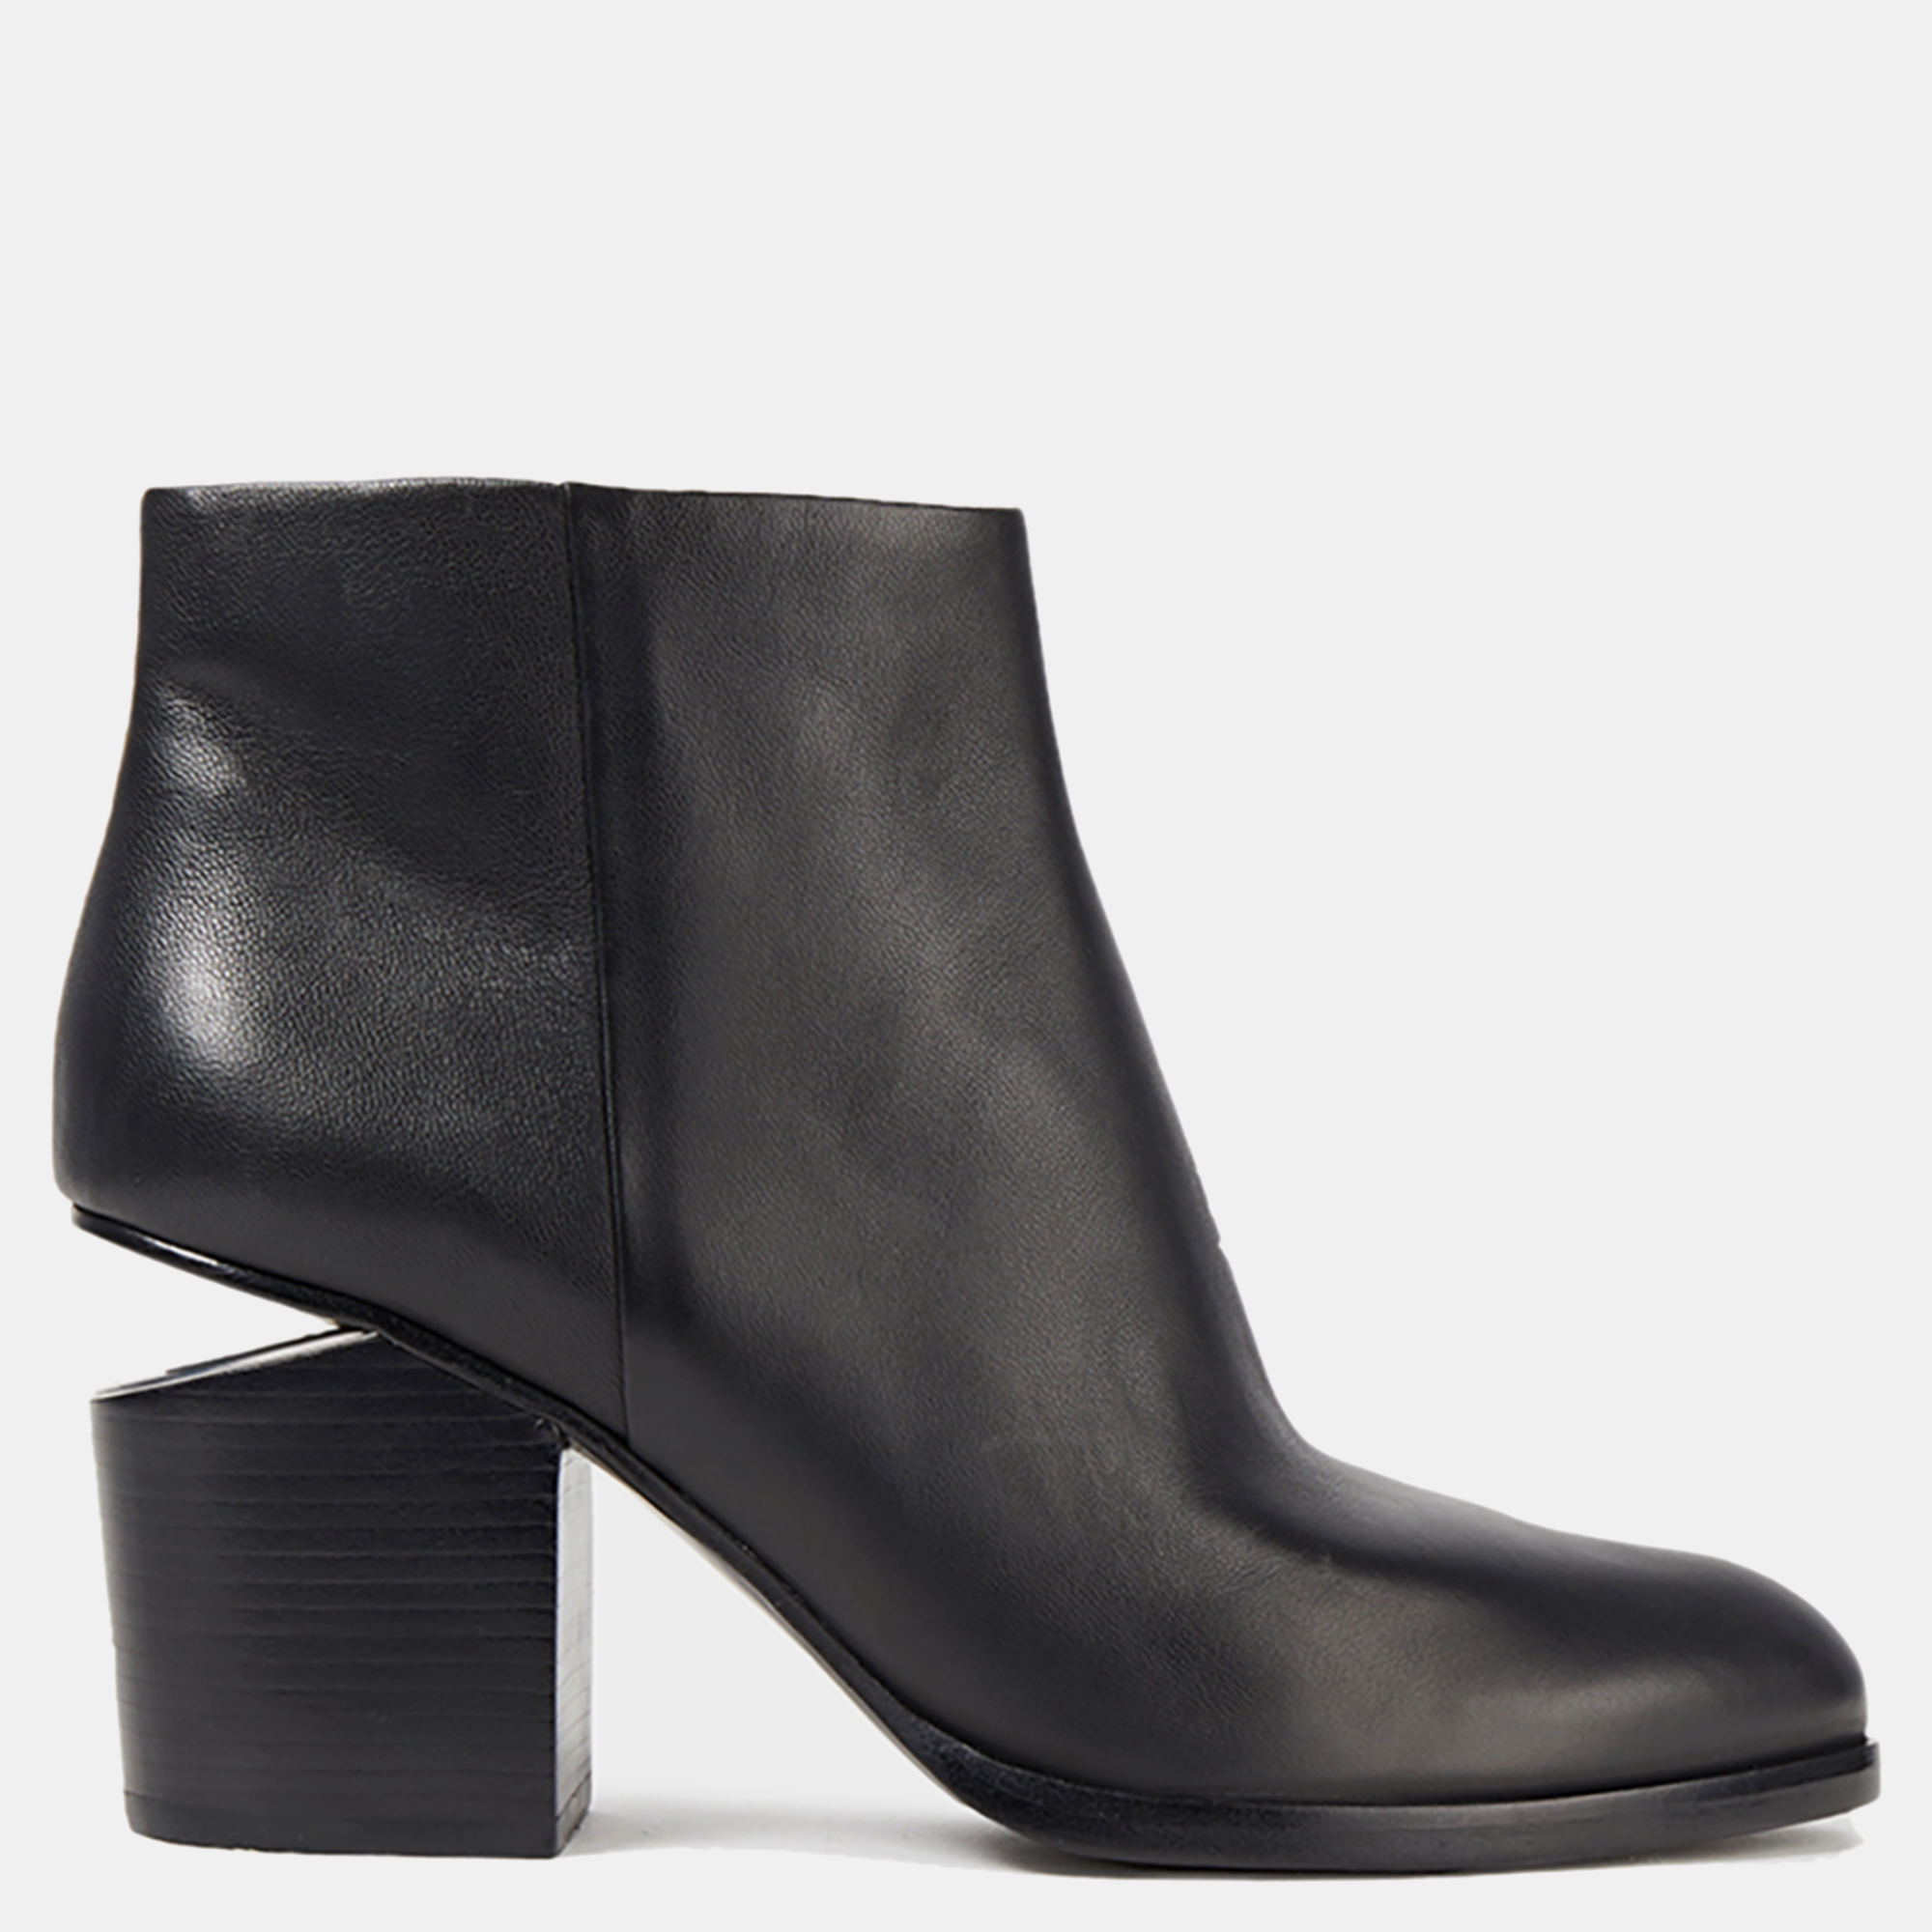 Alexander wang black leather ankle boots 40